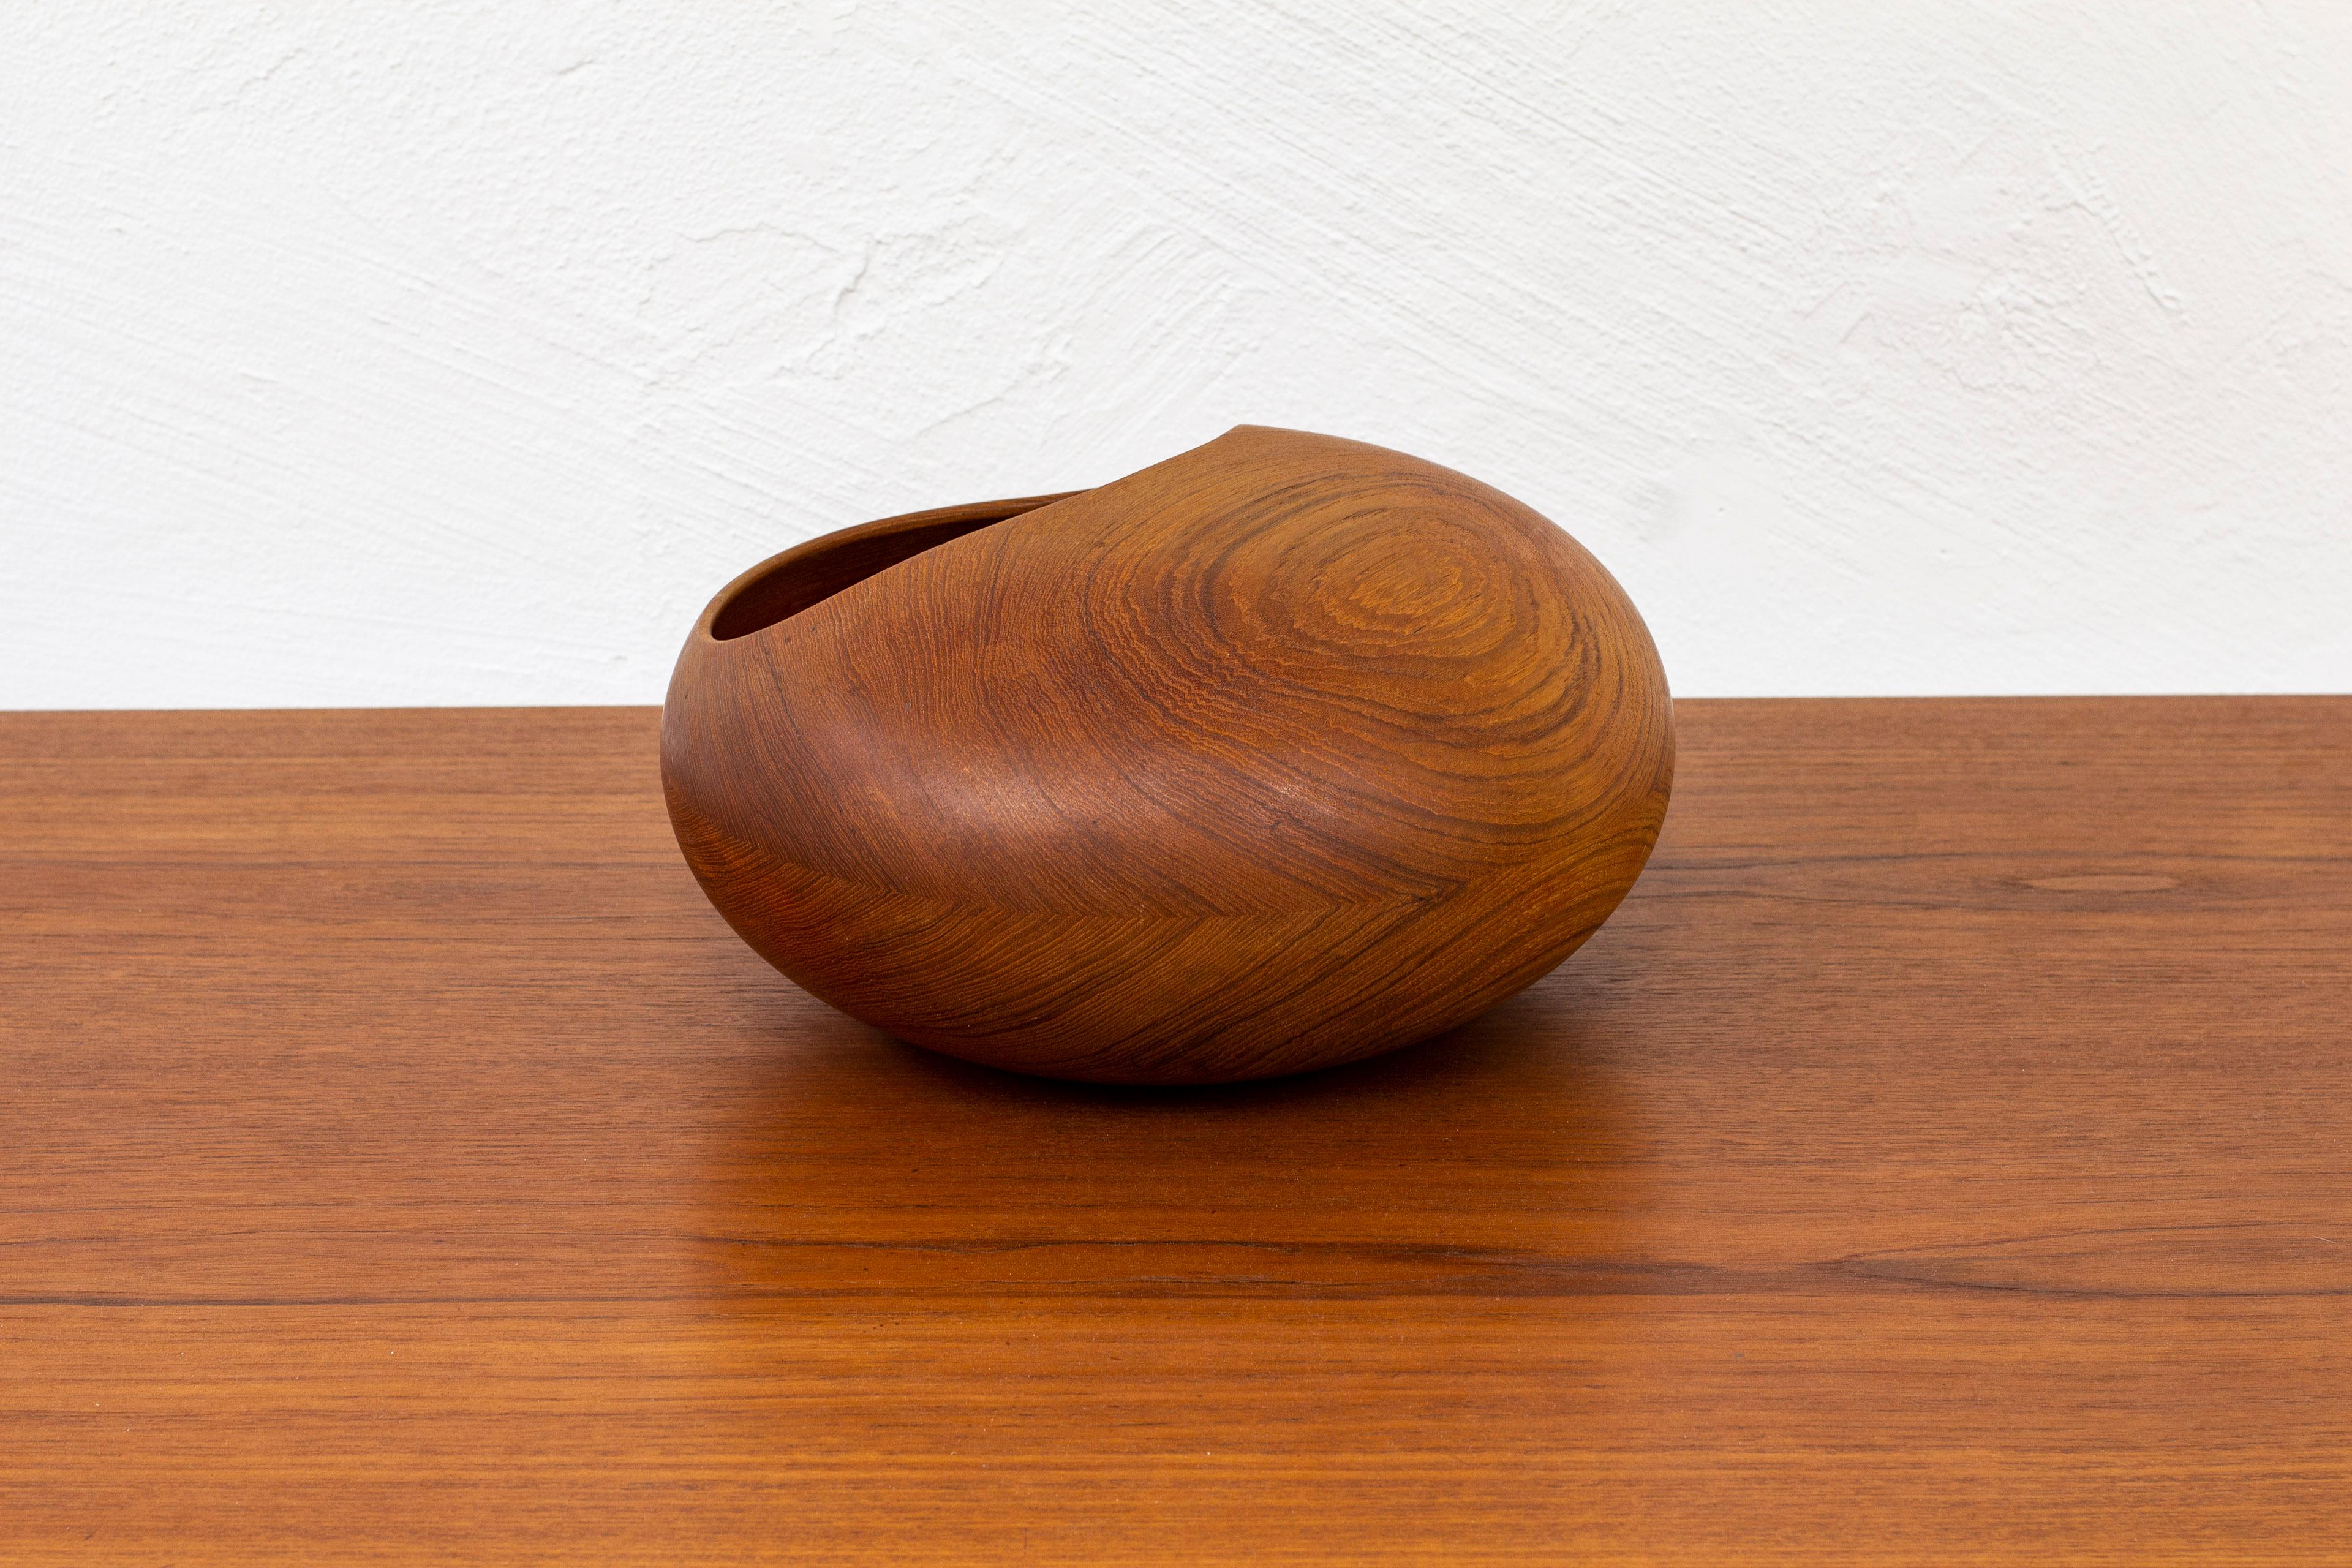 Mid-20th Century Rare Bowl by Sigvard Nilsson, Söwe Konst. Sweden, 1950s For Sale